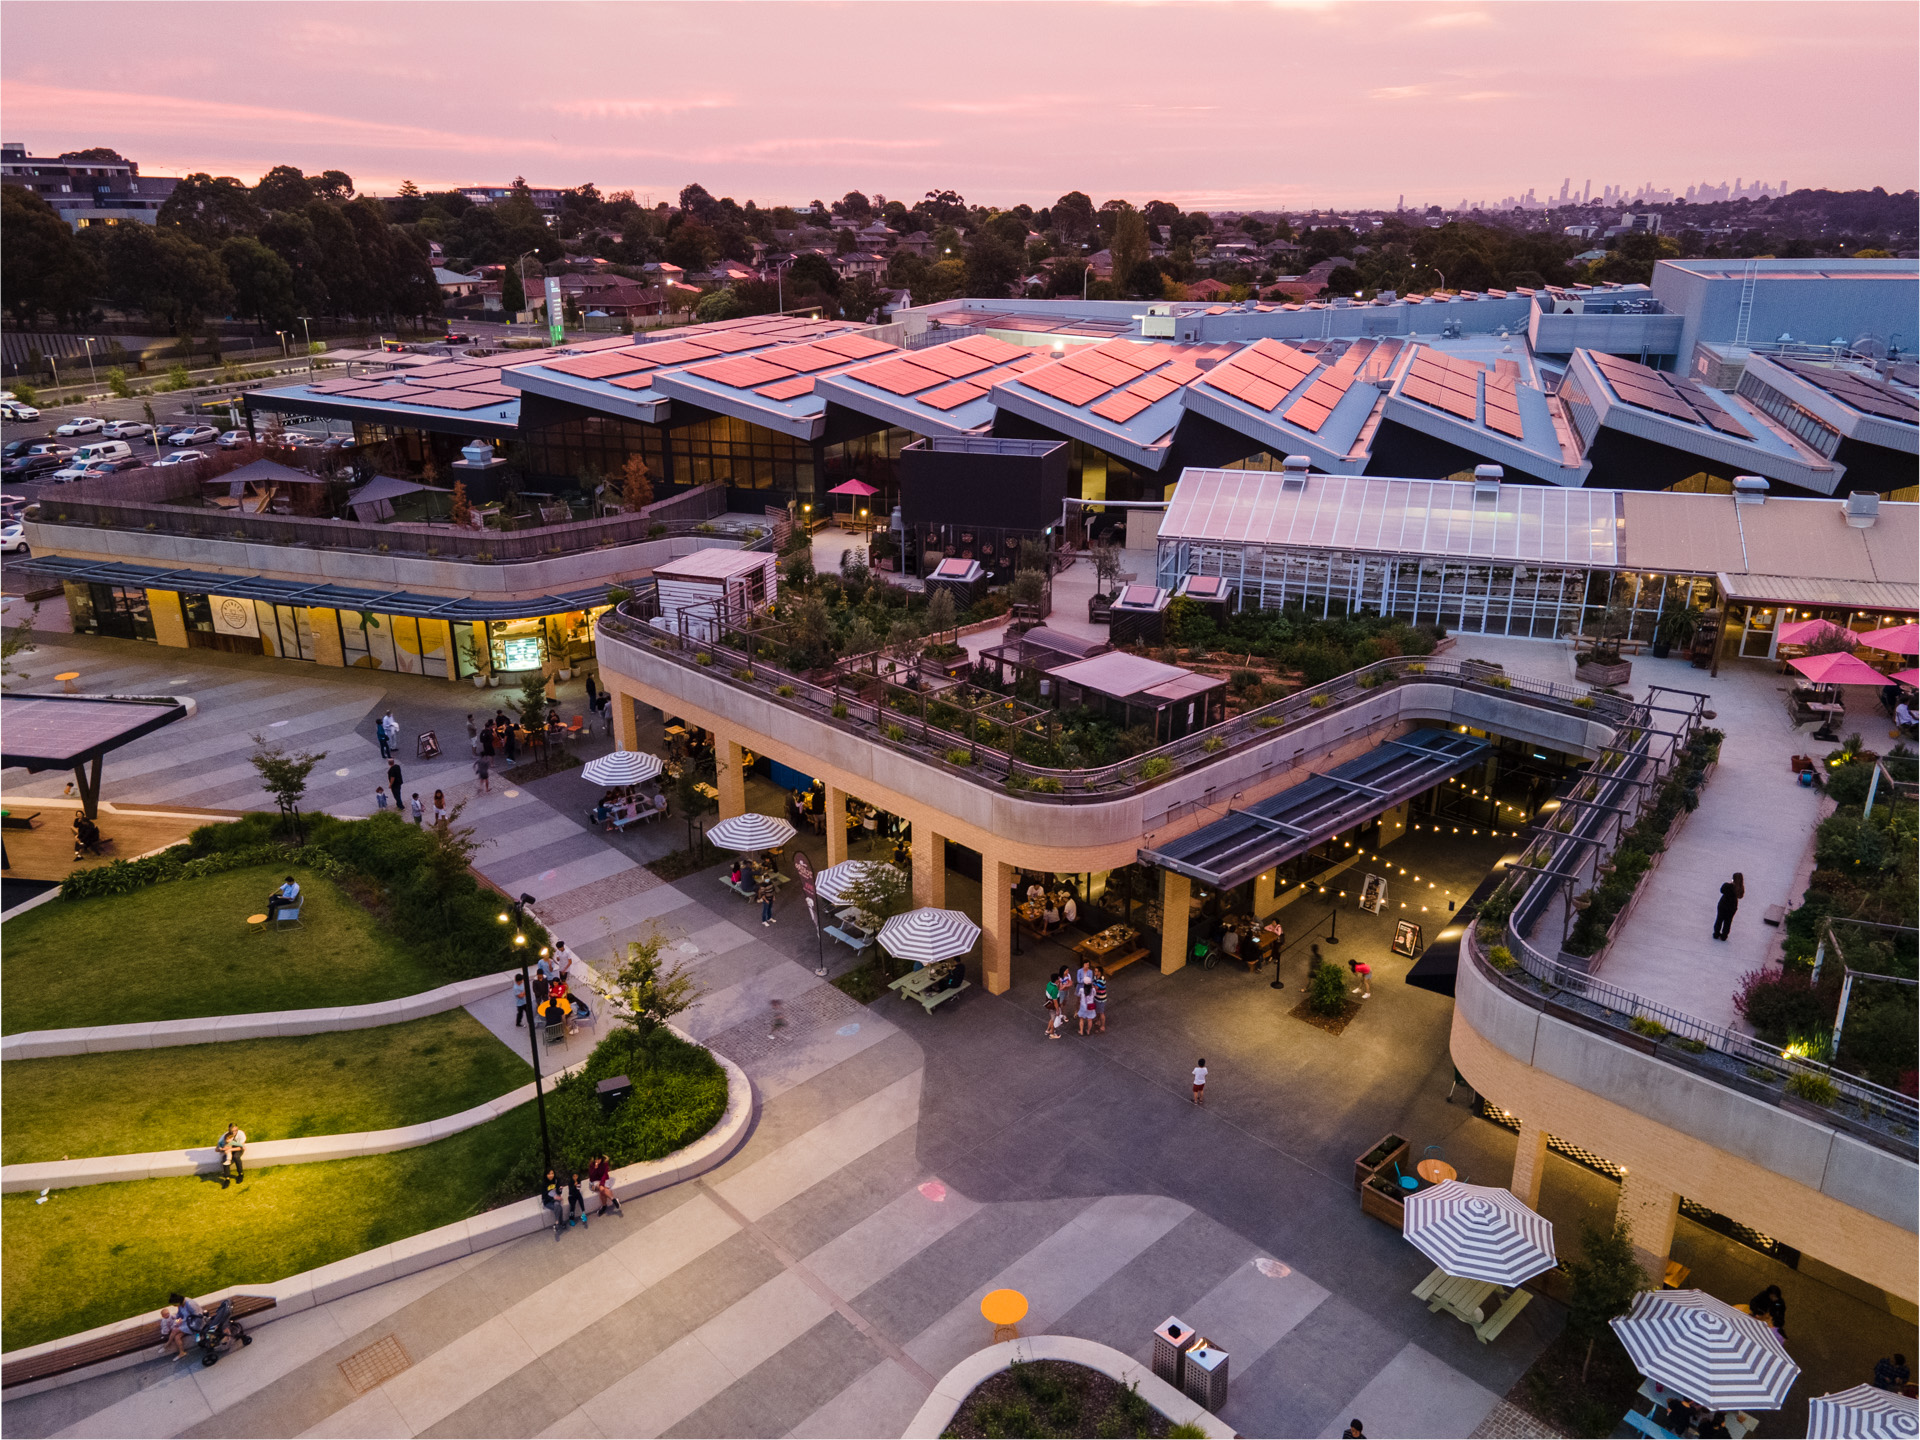 Frasers Property Australia’s Burwood Brickworks is the world’s most sustainable shopping centre having been awarded the Living Building Challenge® (LBC®) Petal Certification. We are the first organisation in the world to achieve this certification for a retail development.